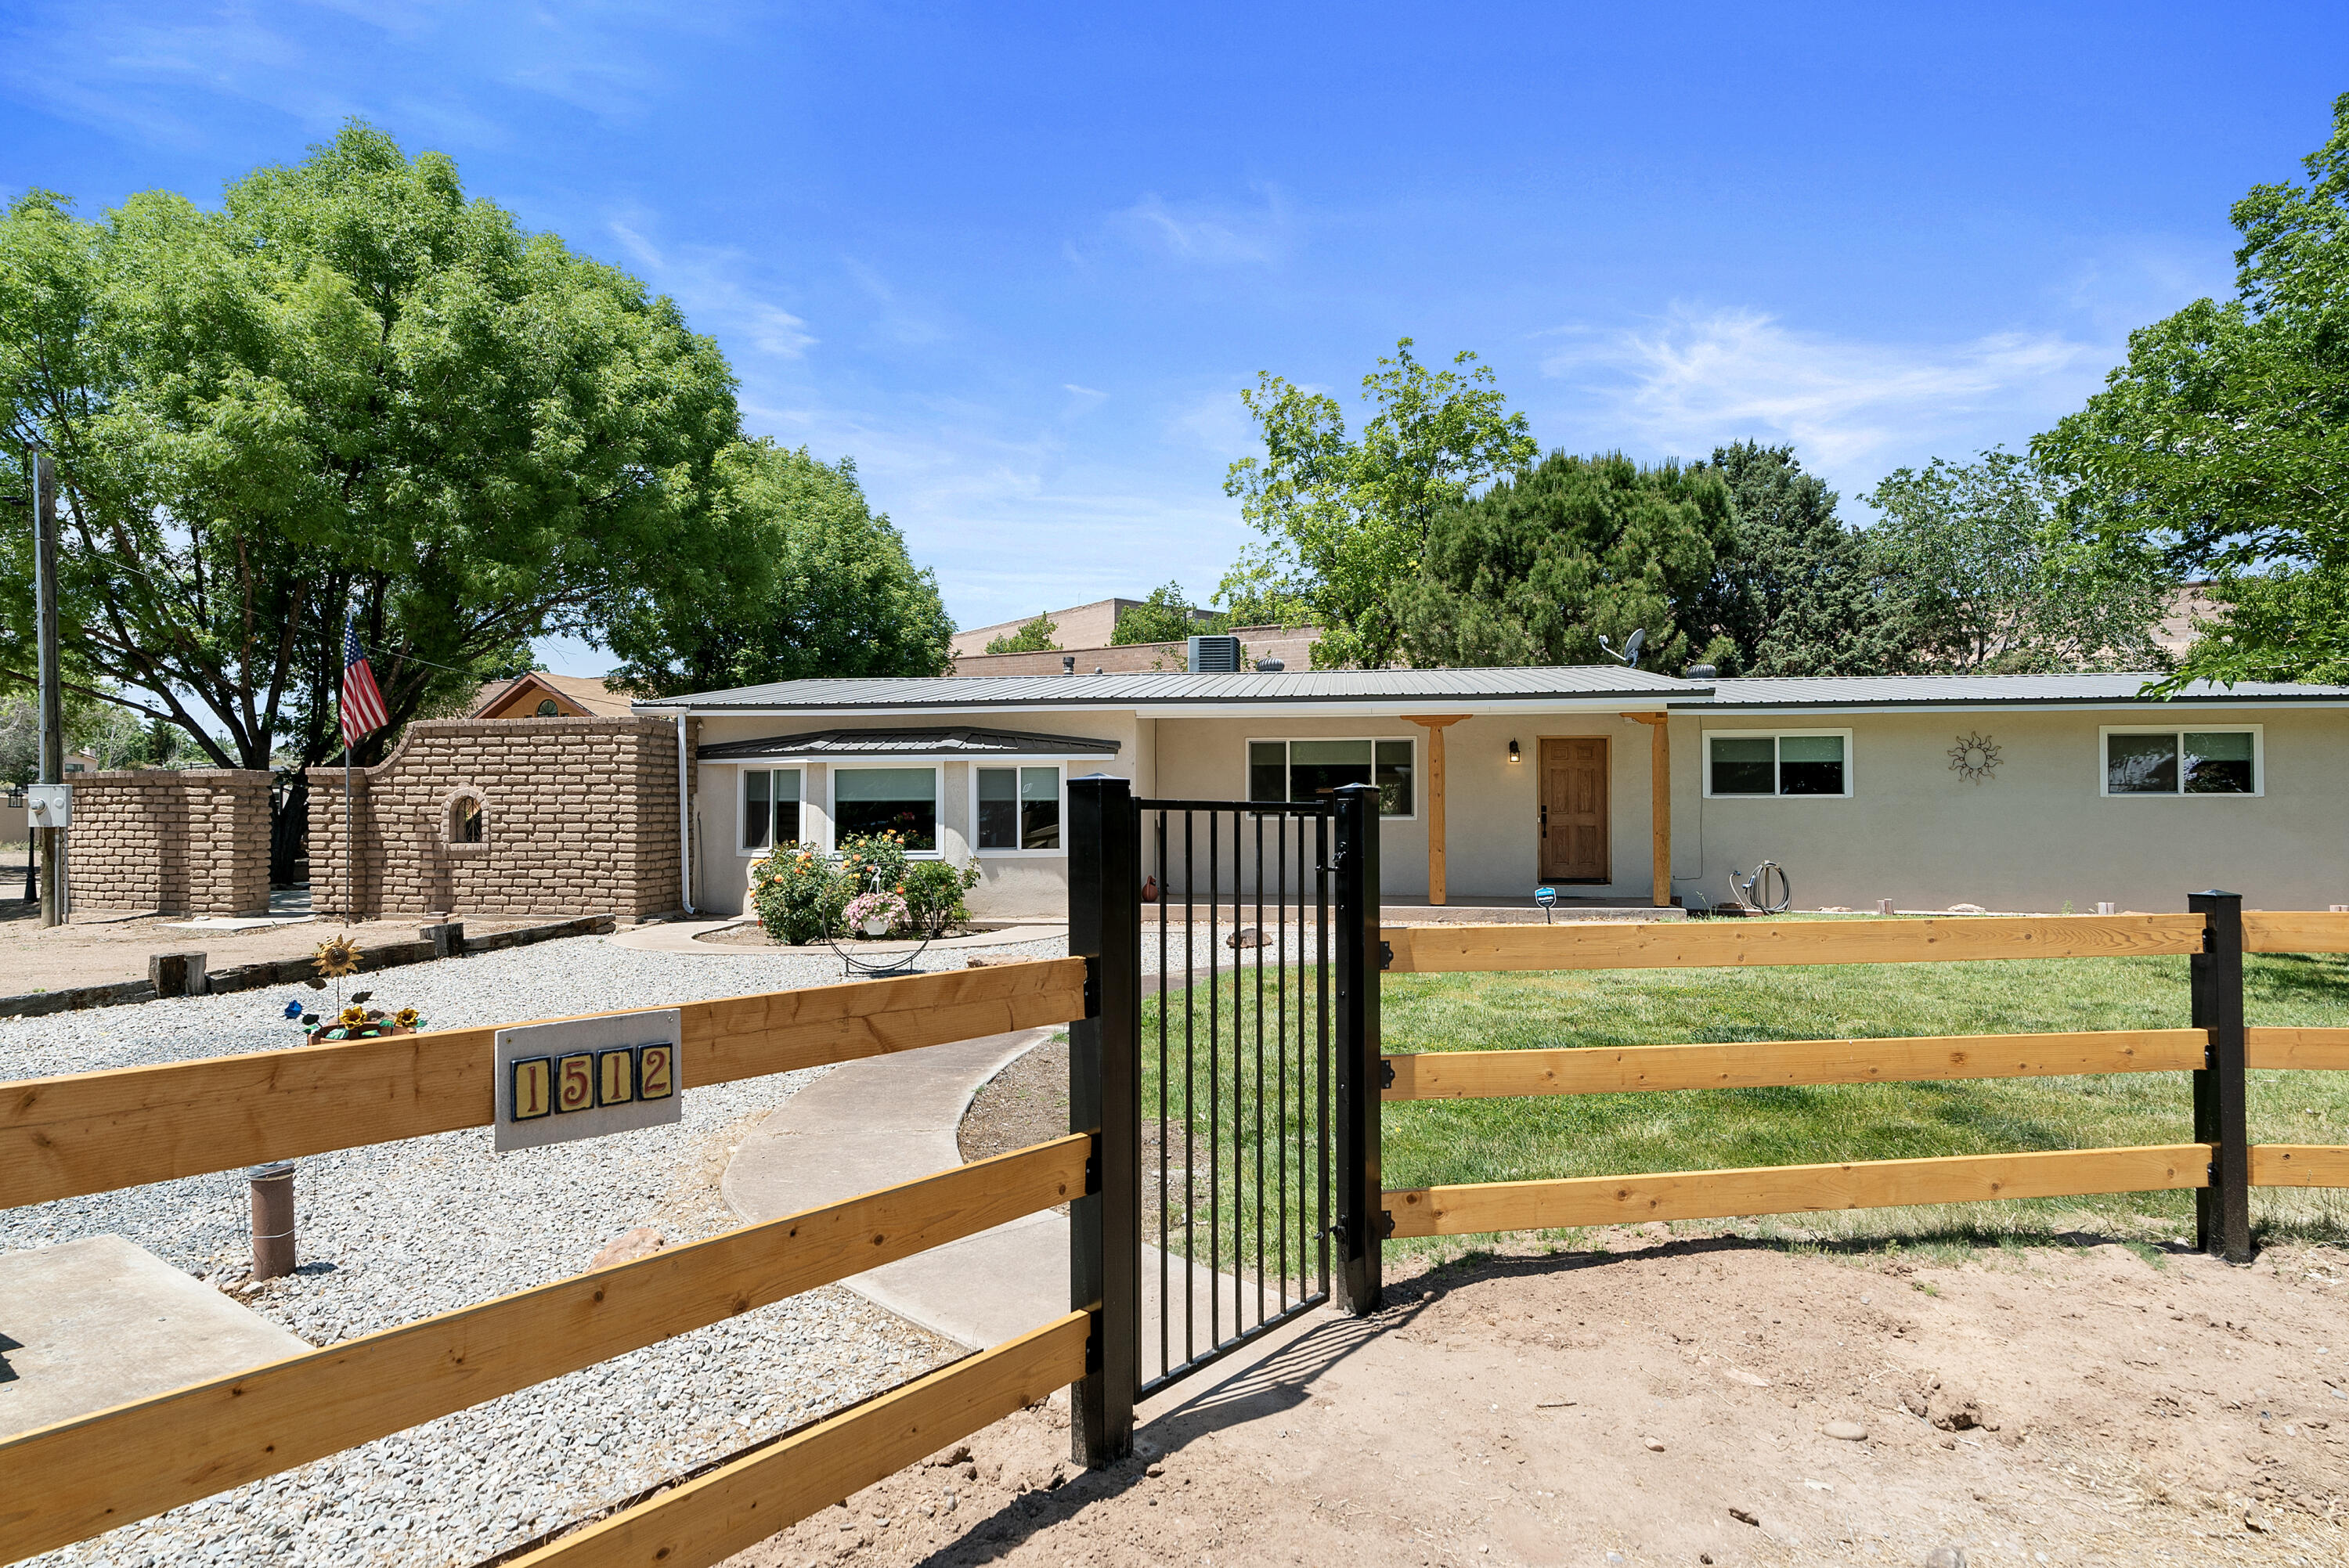 Welcome to your dream home in North Valley! Horses welcome! Remodeled ranch home on 1.24 acres with grass, fruit trees, Acequia trail access, horse stalls, and a workshop with added living space upstairs. The heart of the home is the newer kitchen, boasting ceiling-height cabinets, elegant granite countertops, and state-of-the-art black stainless steel appliances. The custom subway tile backsplash adds a touch of sophistication to this culinary haven. There's a bonus hobby room that's flooded with sunlight, along with a sunroom. Newer stucco, Pella windows, mini splits and HVAC, and the property is fully fenced with an electric gate. Great location, rural yet minutes to I-25, great restaurants, and shopping. This is the perfect setting to enjoy and make memories. Make it yours!